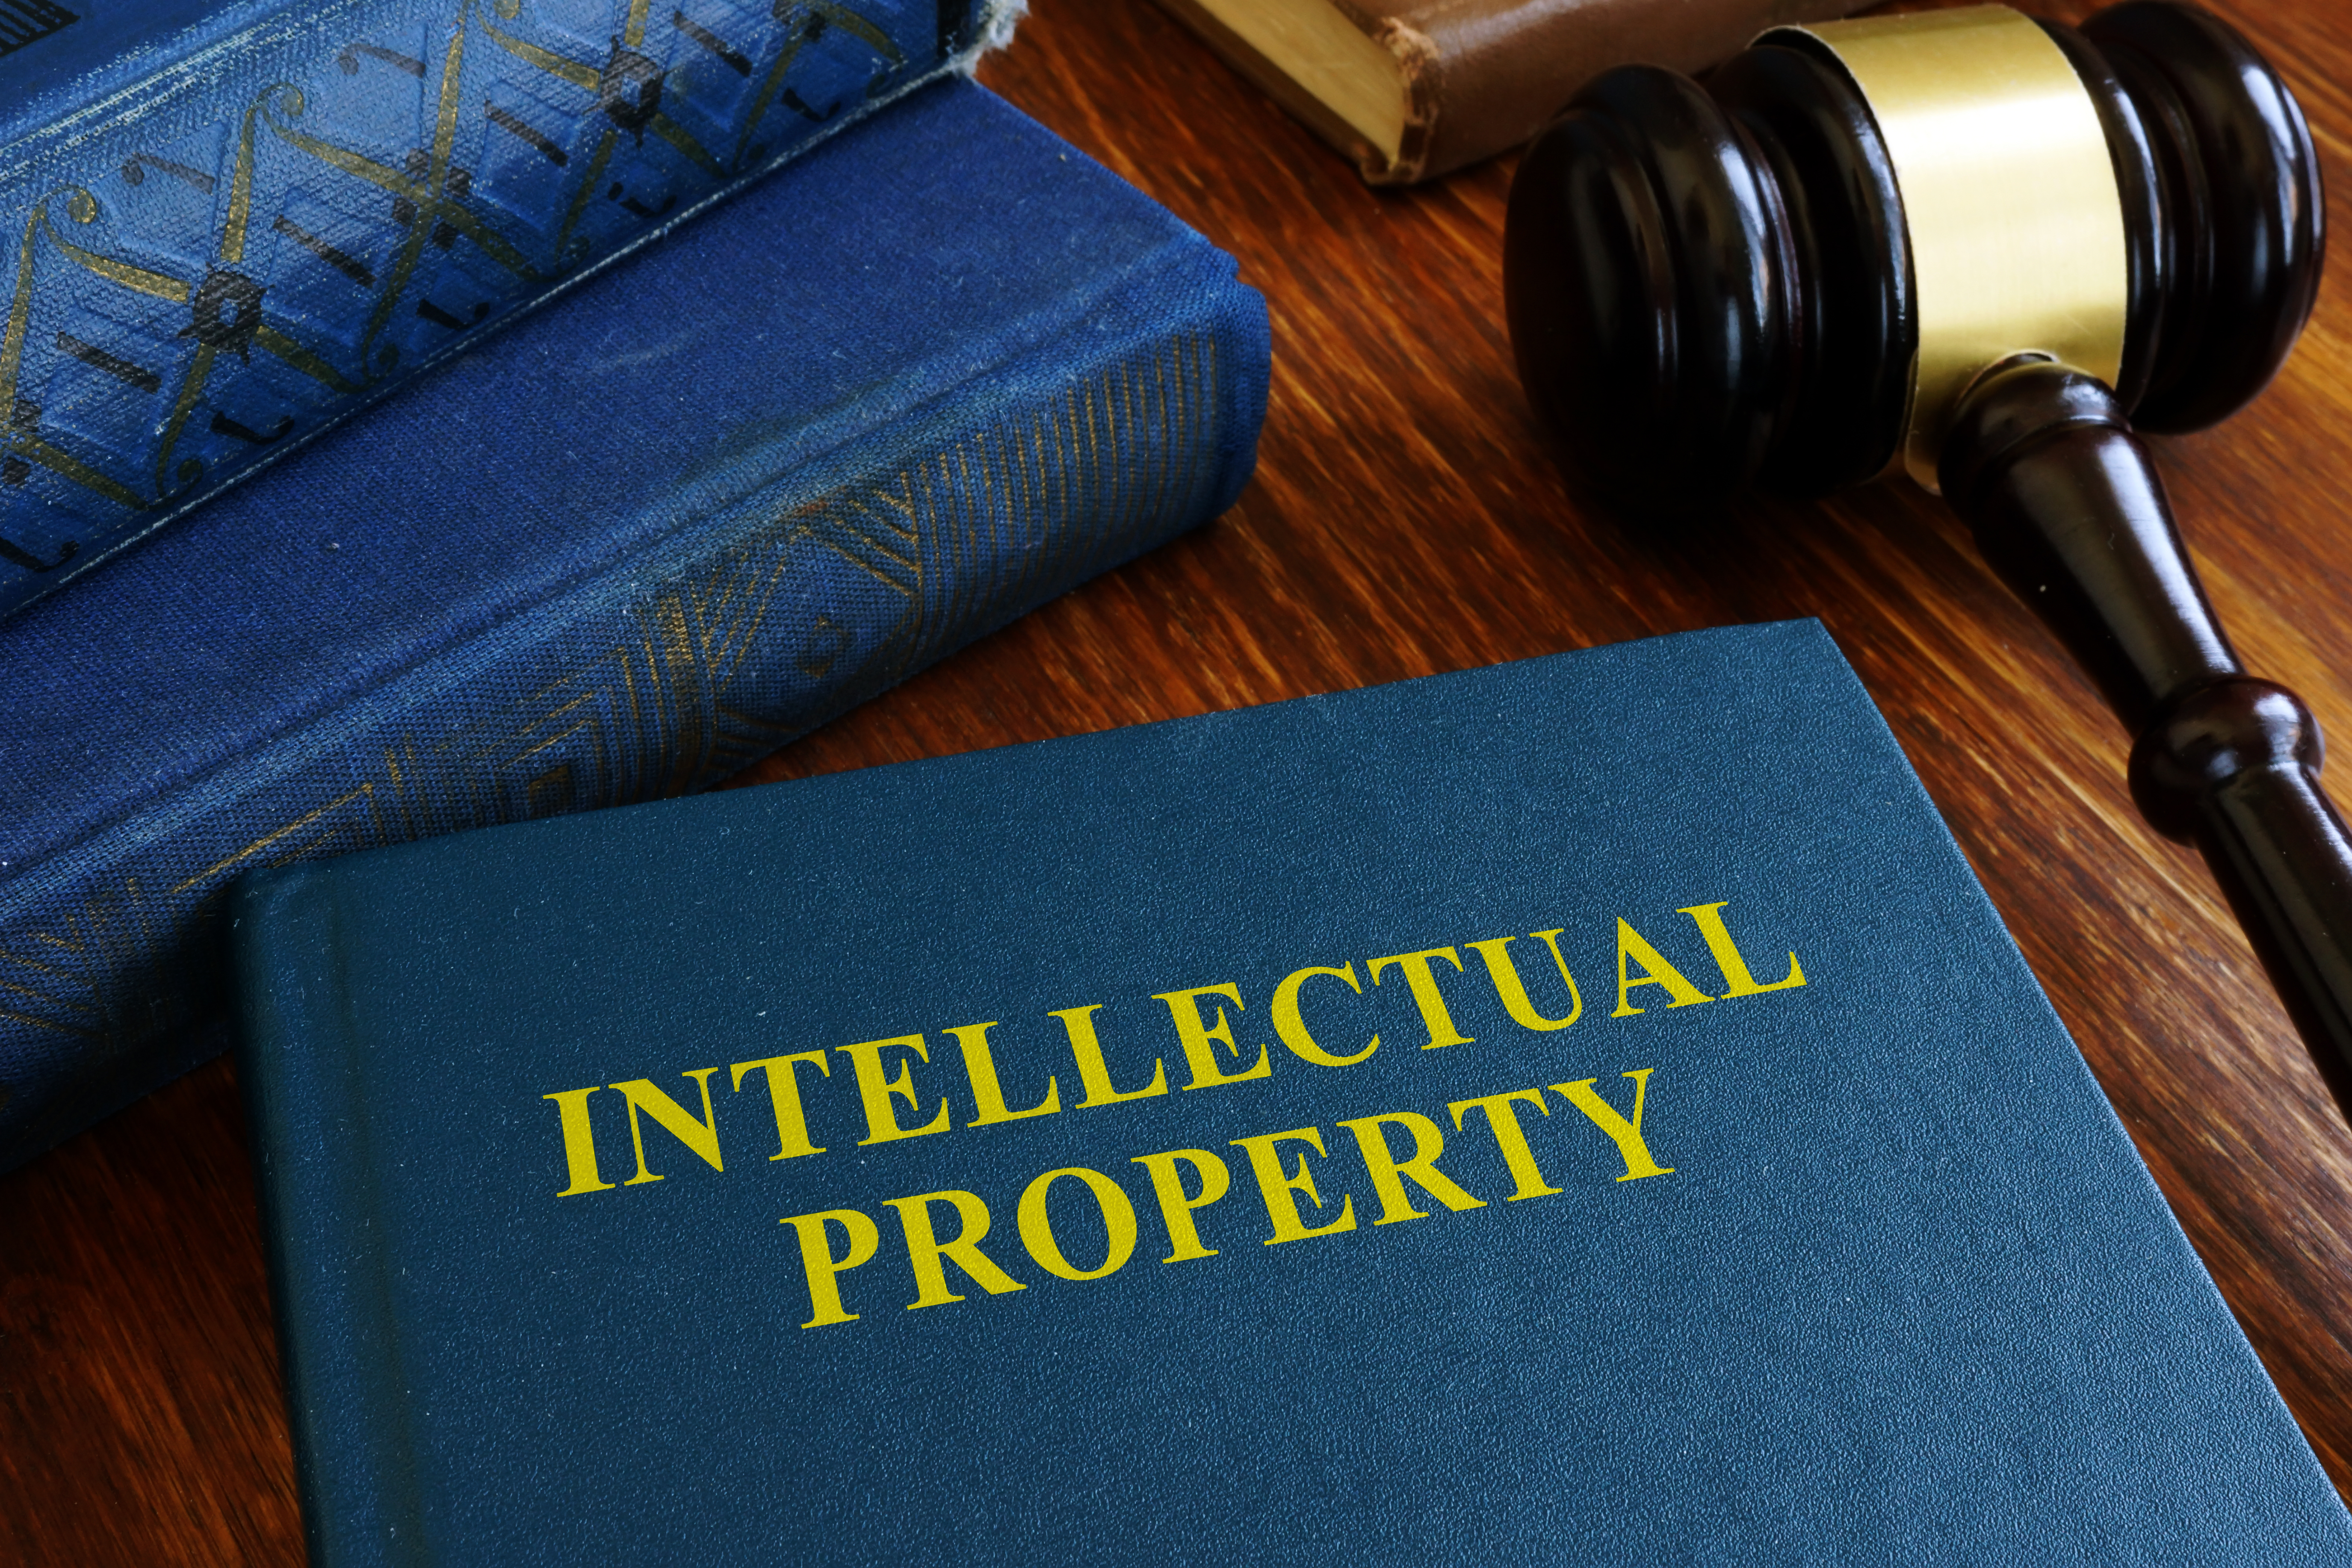 Intellectual Property book with a gavel next to it